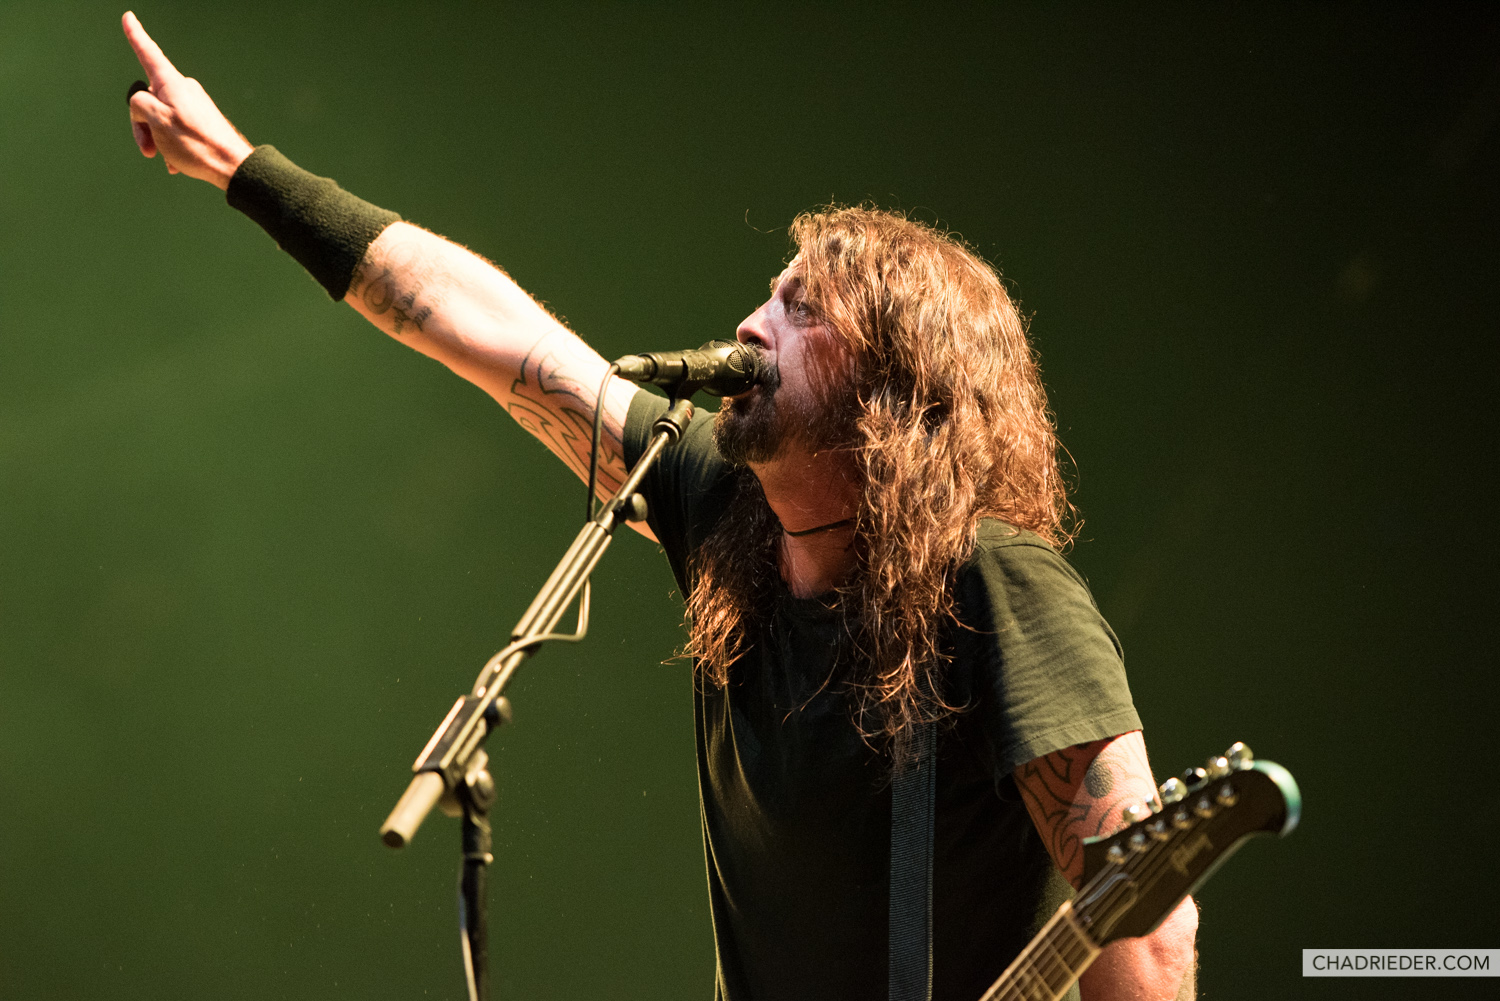 Dave Grohl pointing